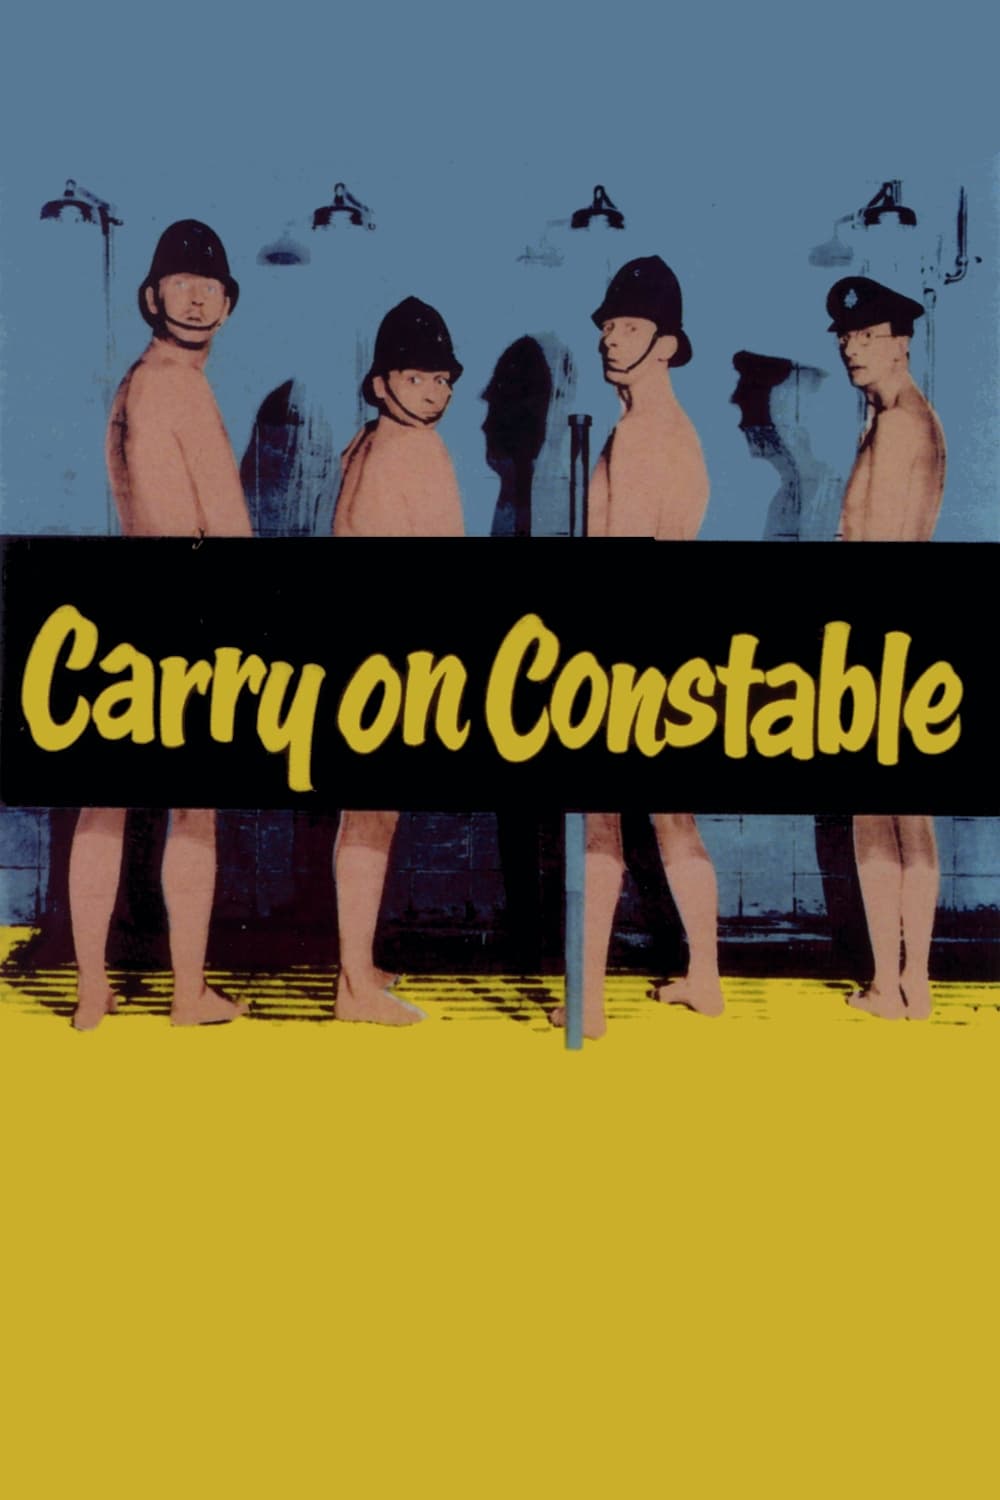 Carry On Constable